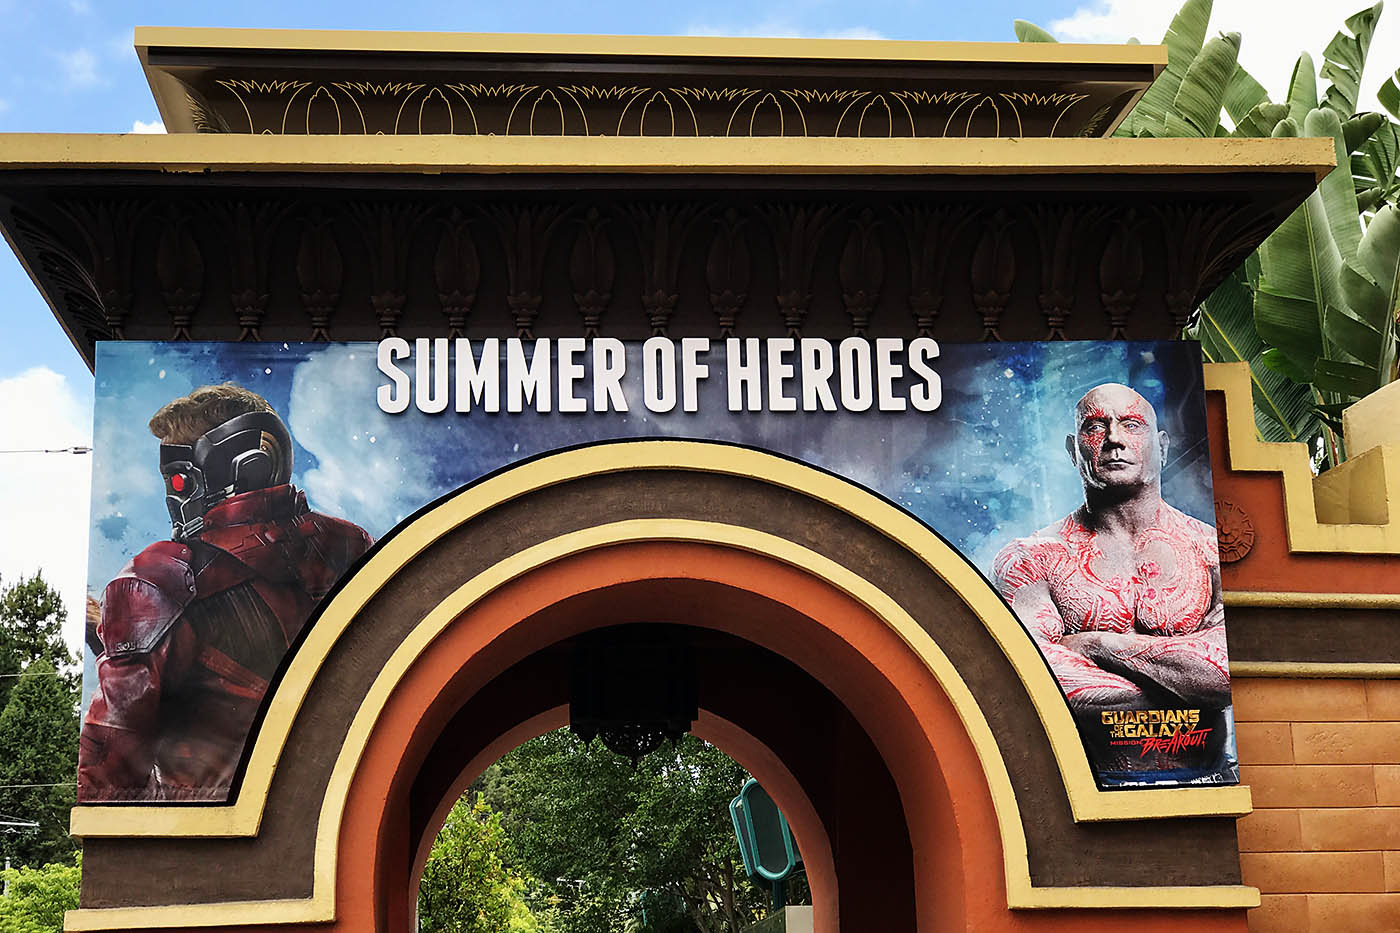 The Ultimate Family Guide to the Summer of Heroes at Disney California Adventure